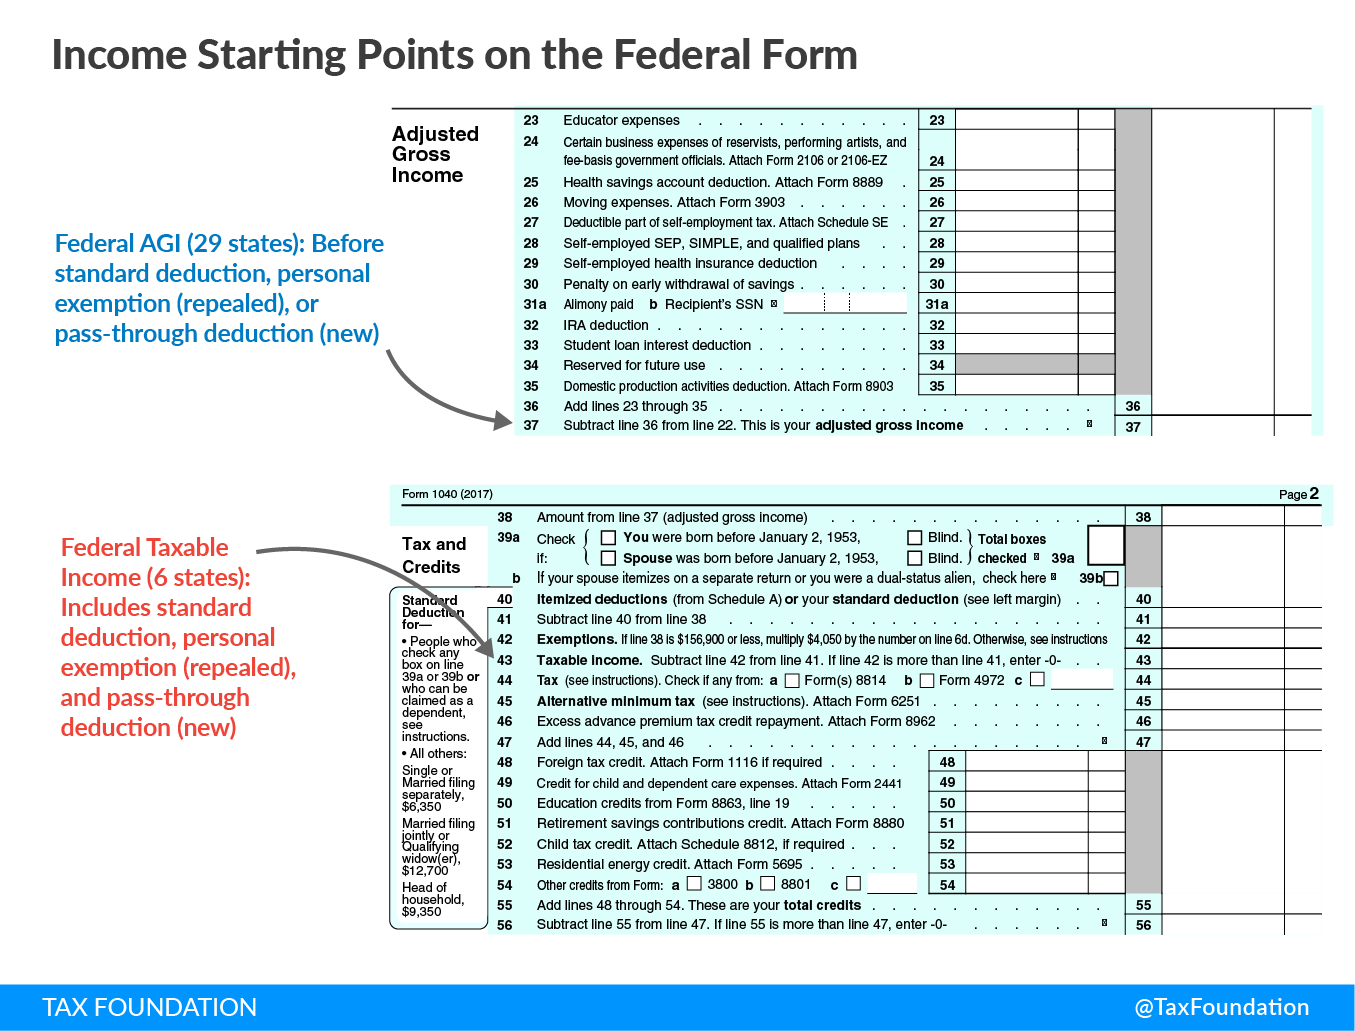  Income Starting Points on the Federal Form